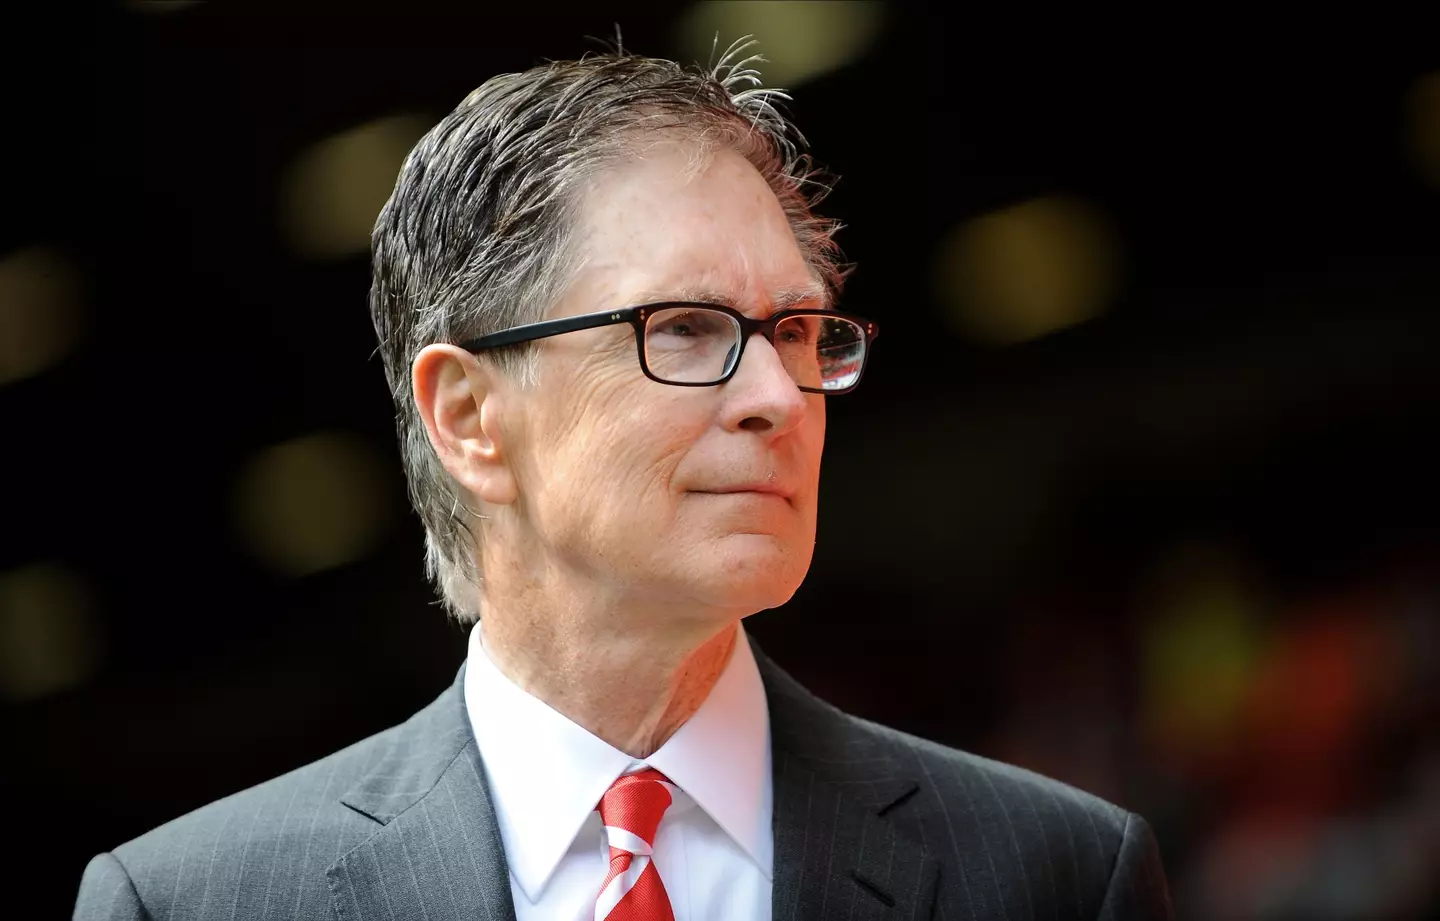 John Henry's Fenway Sports Group has owned Liverpool since 2010 (Image: Alamy)